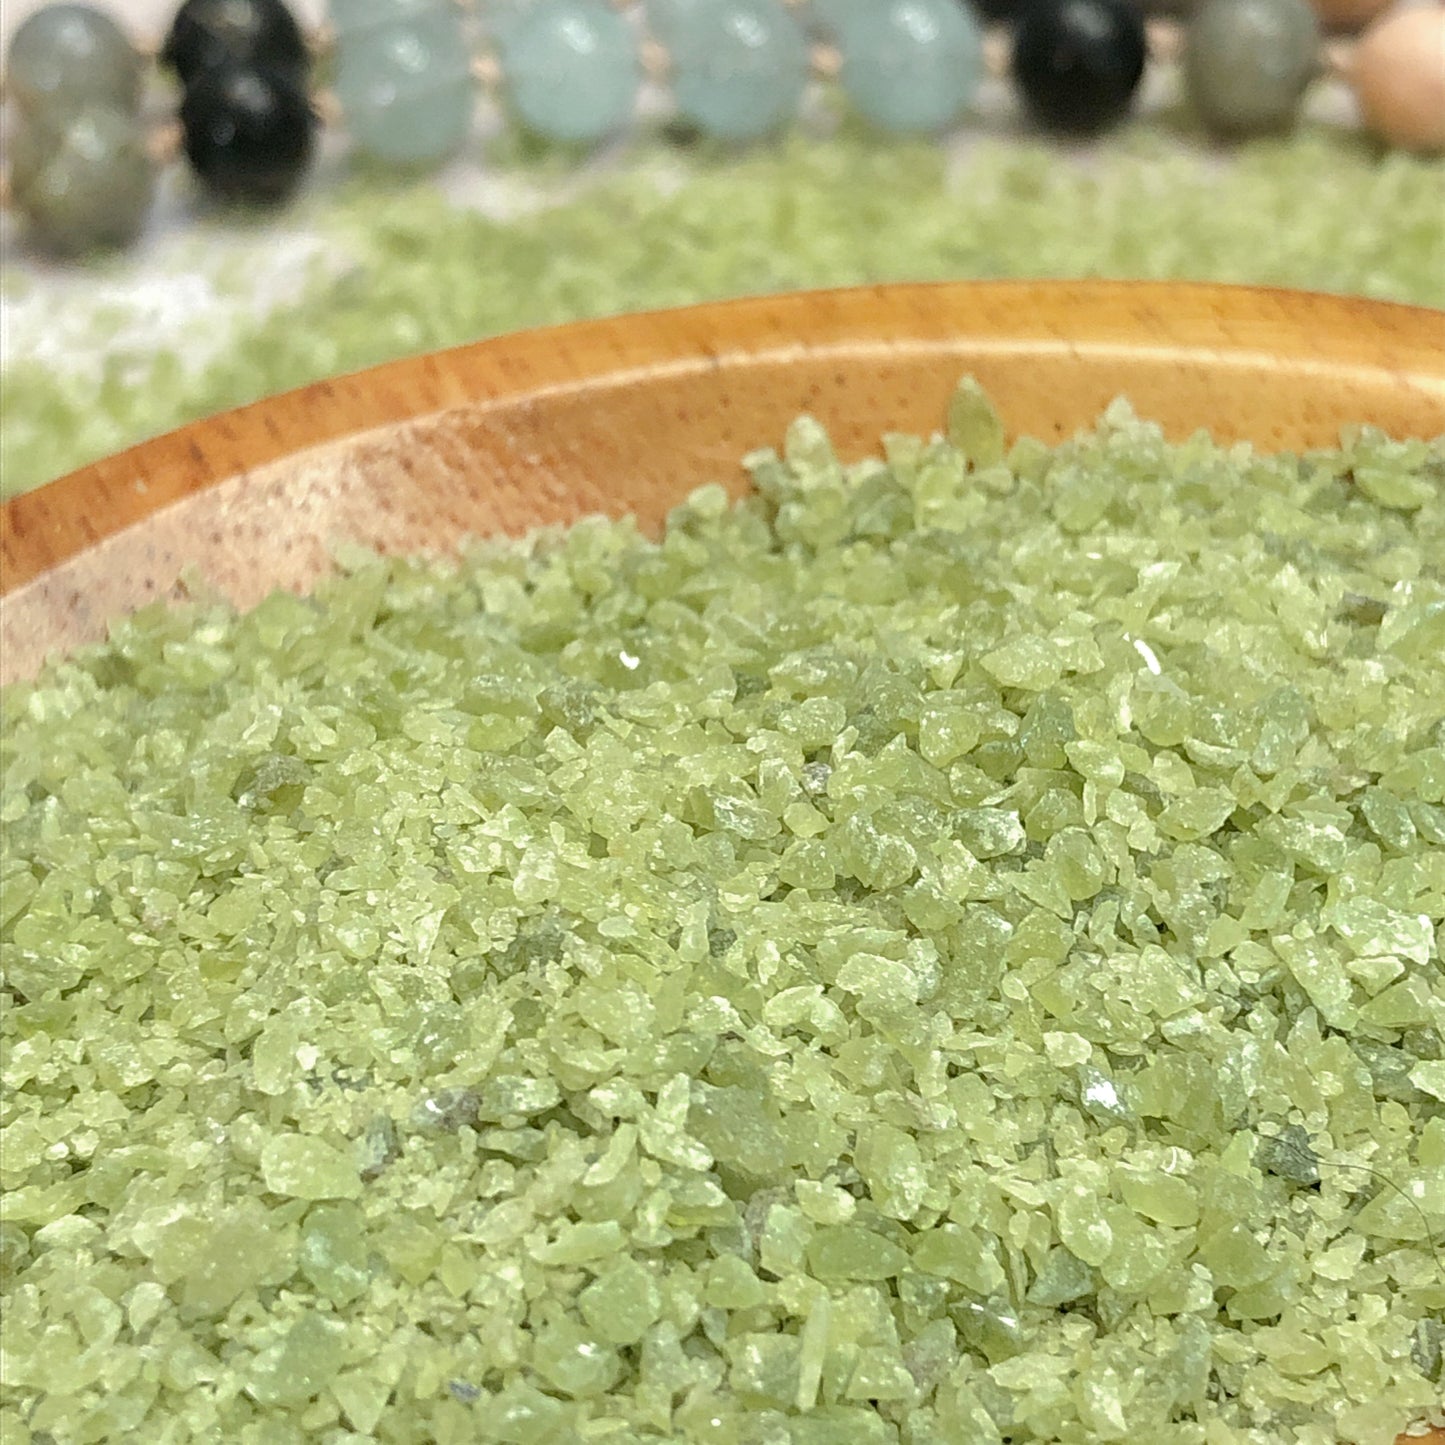 Crushed RARE Gemmy Green Idocrase (Grade A+) from Kenya, Medium Crush, Sand Size (2mm - 0.25mm) for Metaphysical Use, Resin Art, Ring Inlay or Jewelry